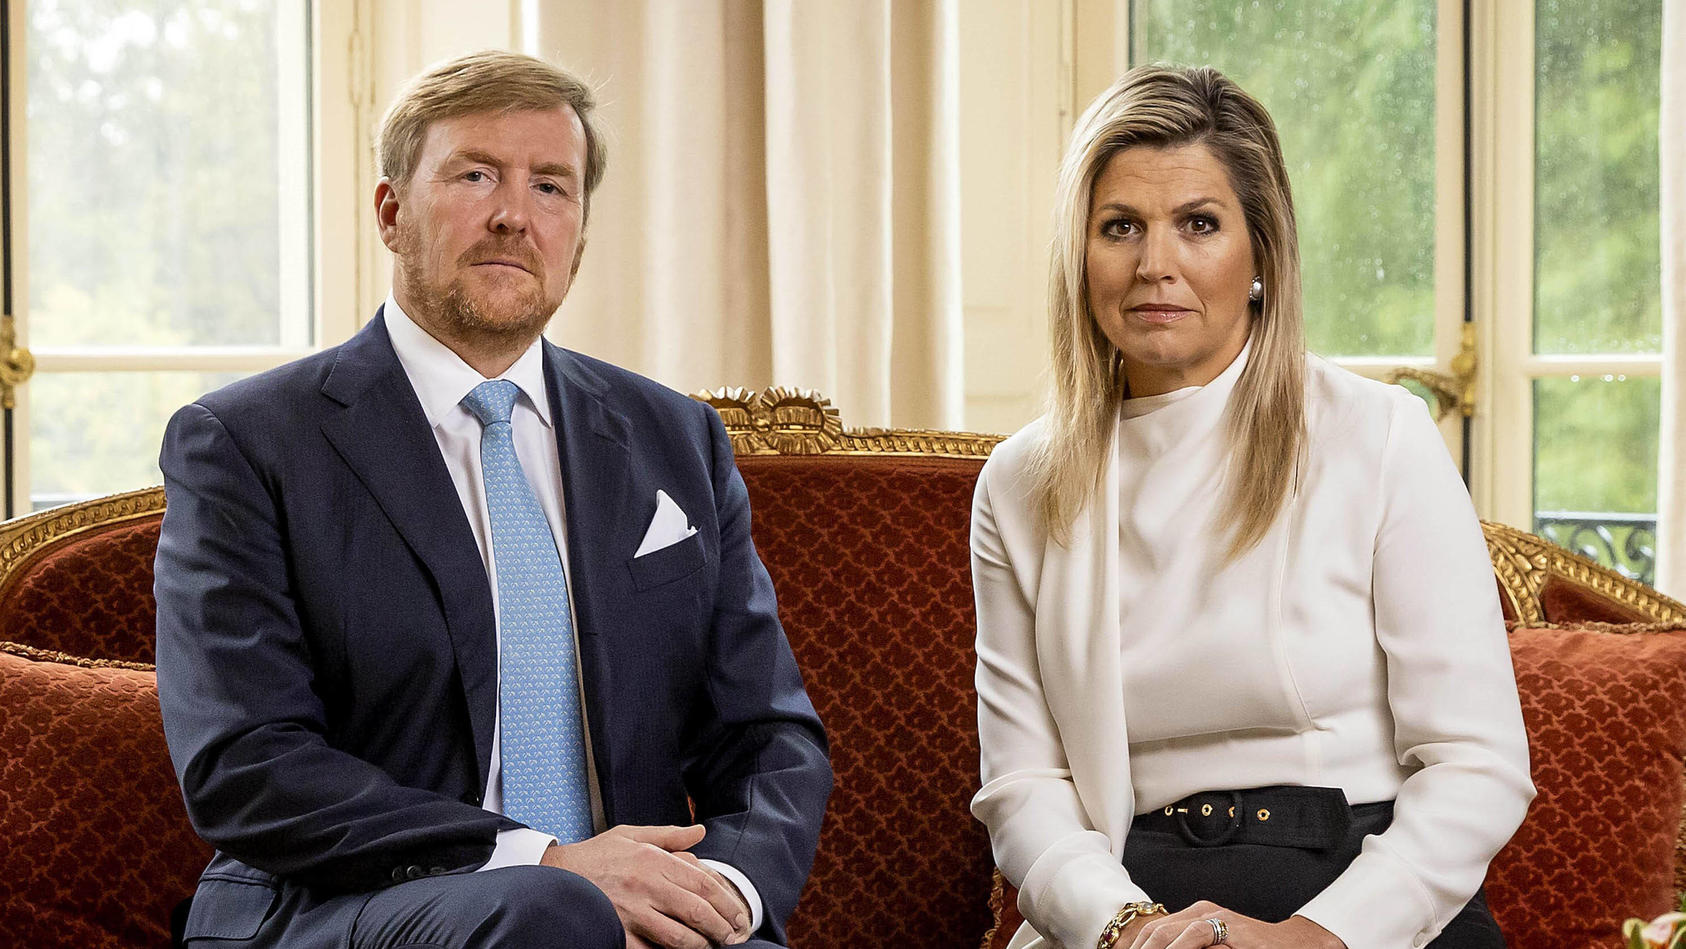  21-10-2020 Hague King Willem-Alexander and Queen Maxima recorded, at palace Huis ten Bosch in The Hague, a personal video message in which the king discusses the cancellation of the holiday to Greece PUBLICATIONxINxGERxSUIxAUTxONLY Copyright: xPPEx